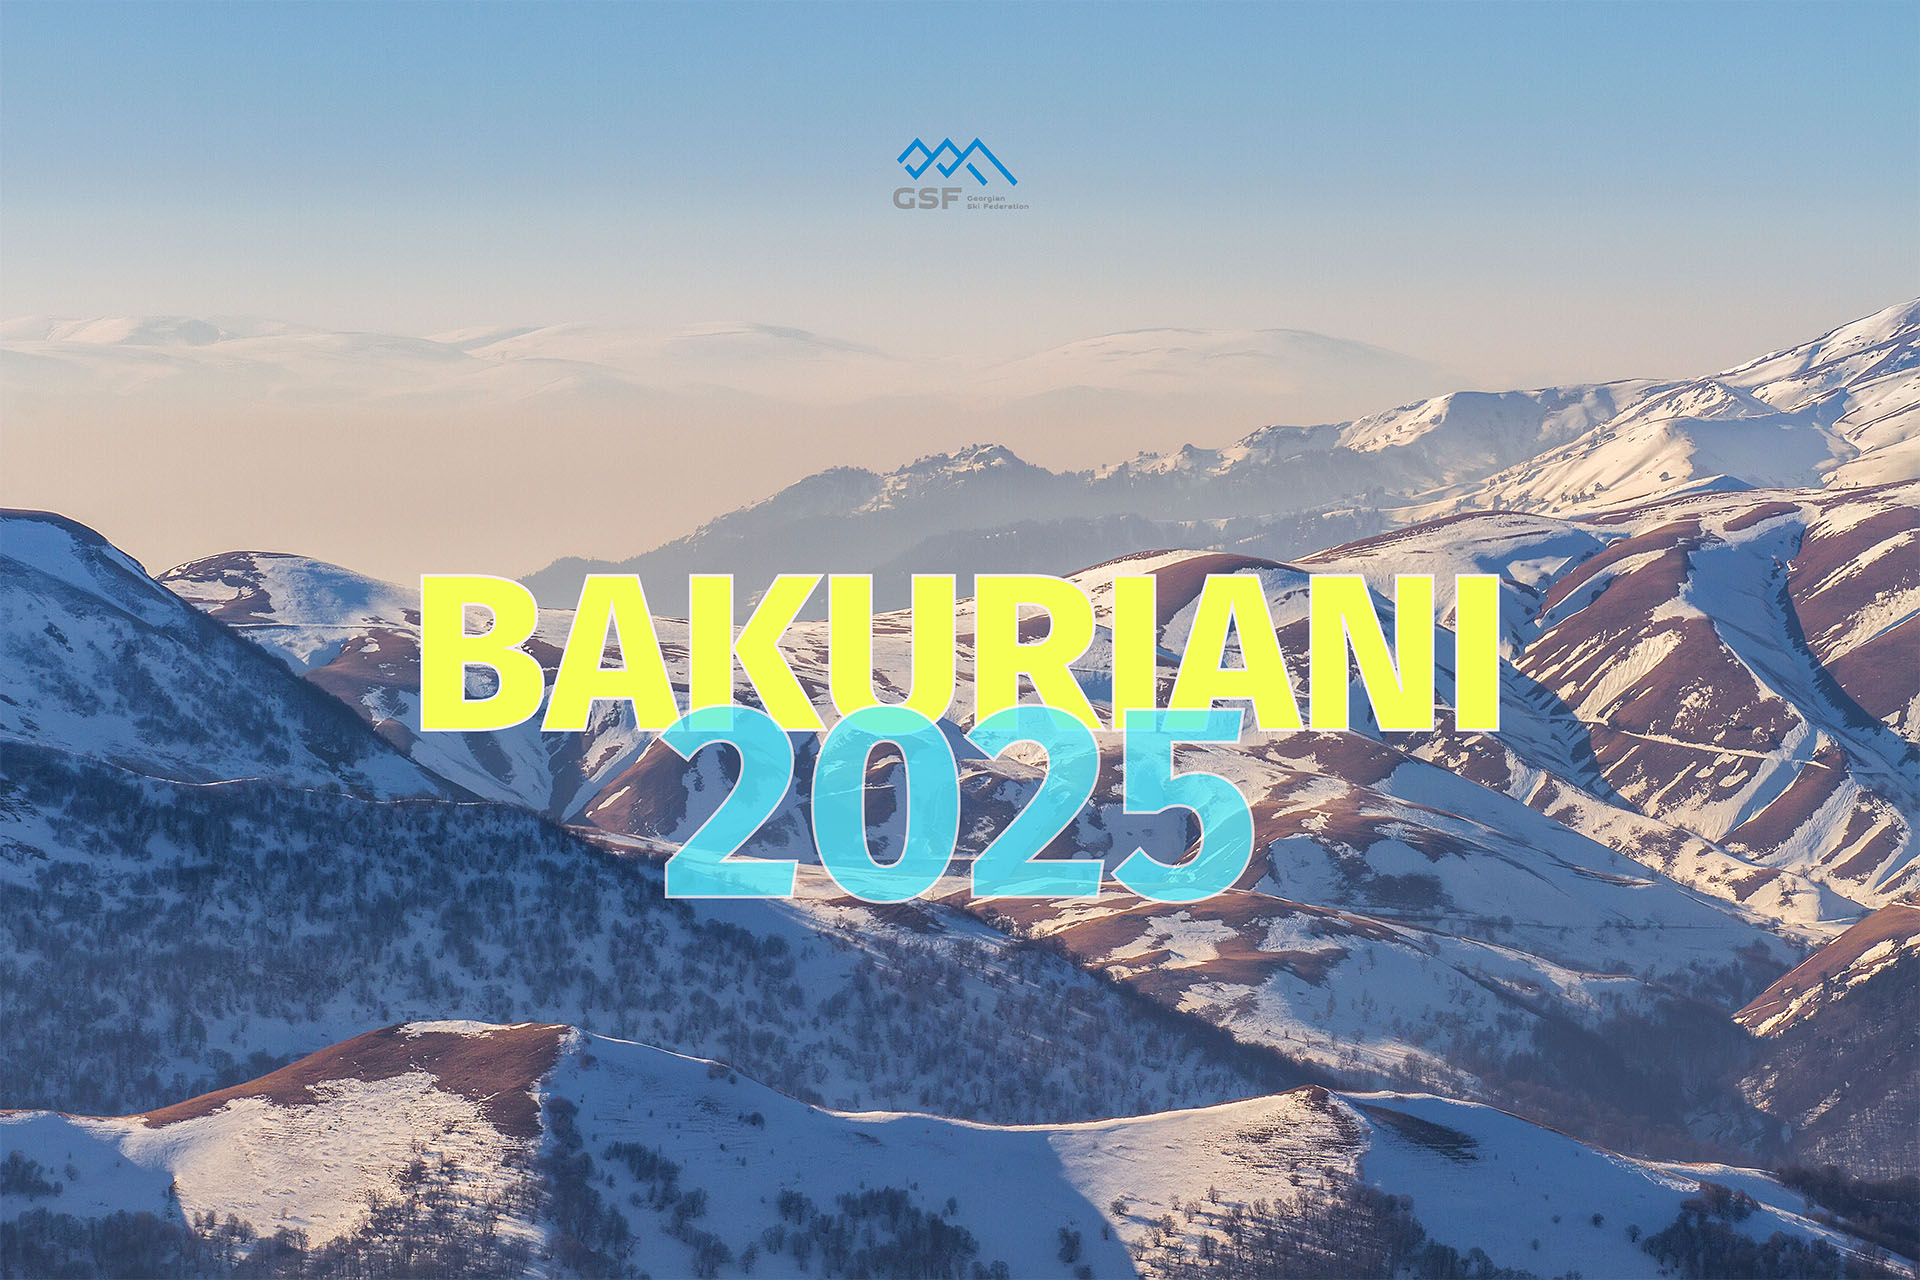 Bakuriani Host to European Youth Olympic Festival 2025 GSF.ge